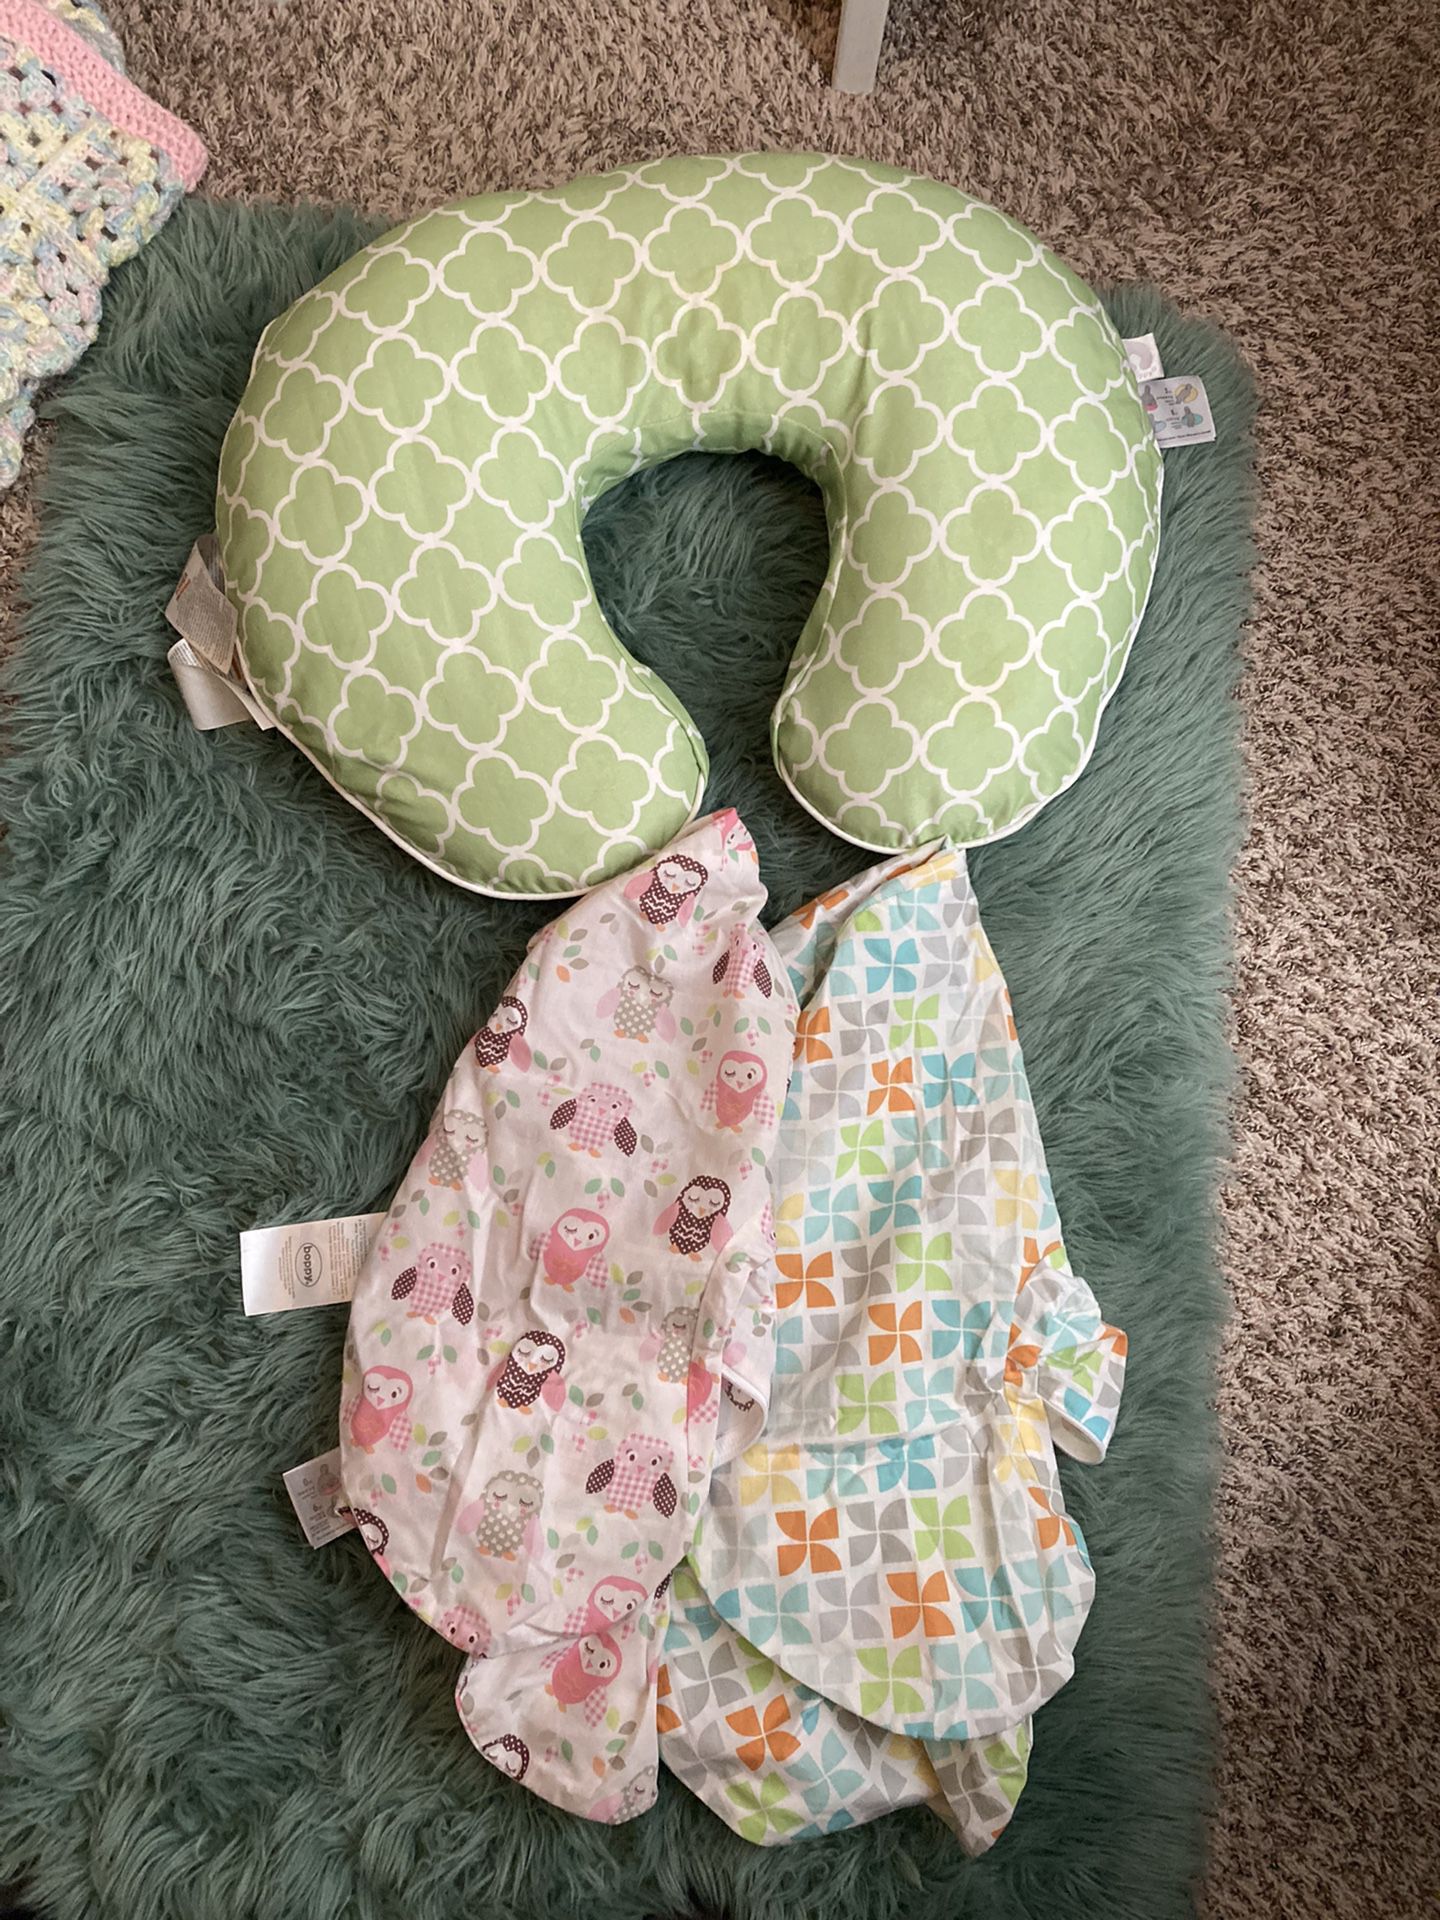 Boppy Pillow With 3 Covers 